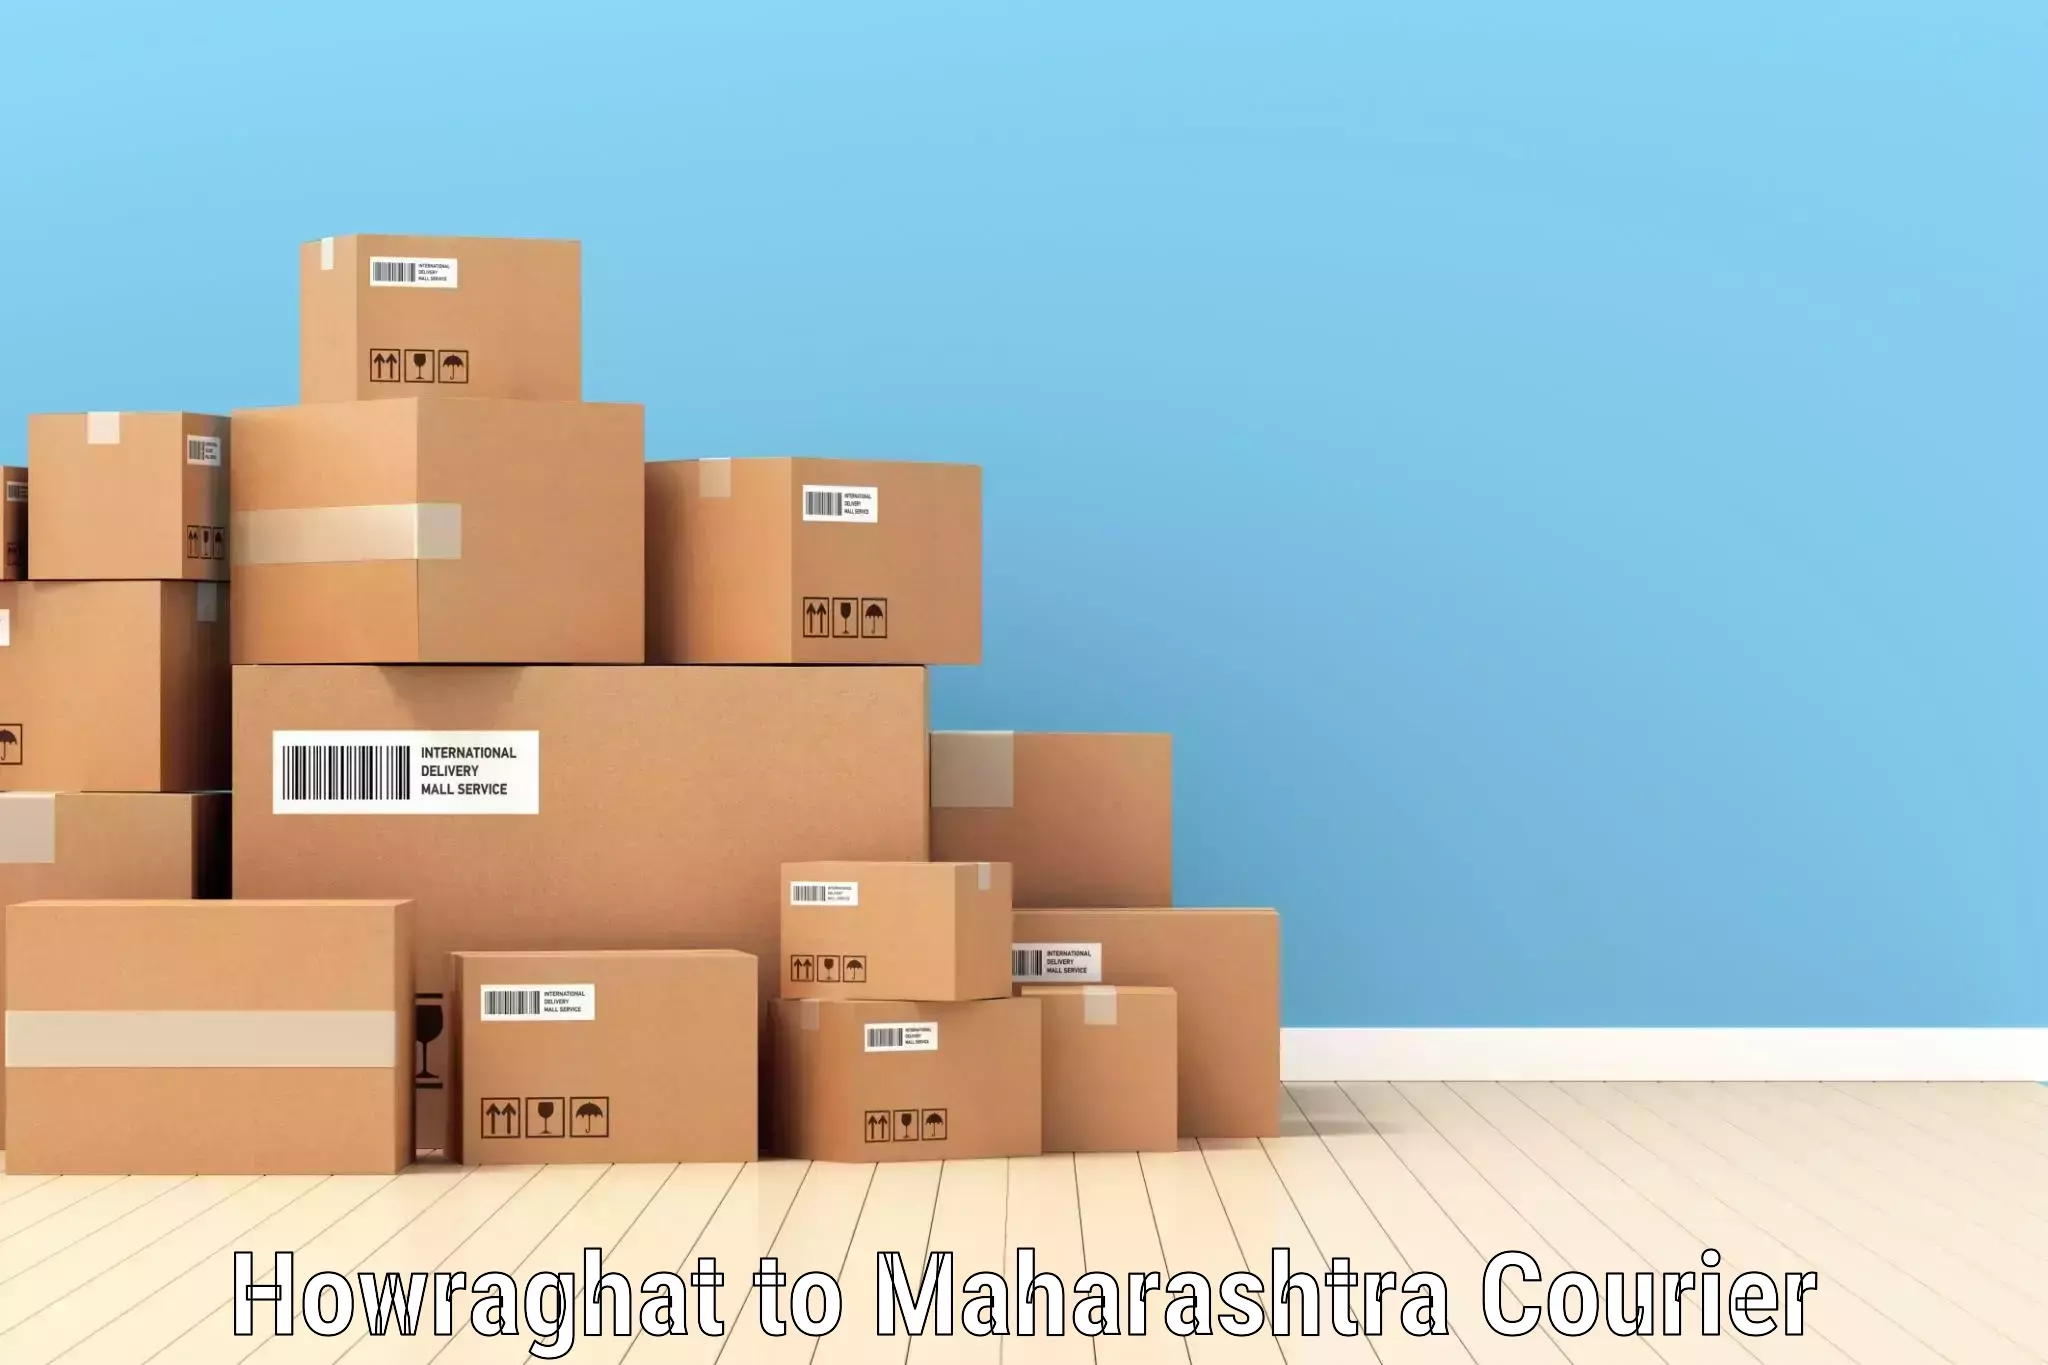 Competitive shipping rates Howraghat to Chinchbunder